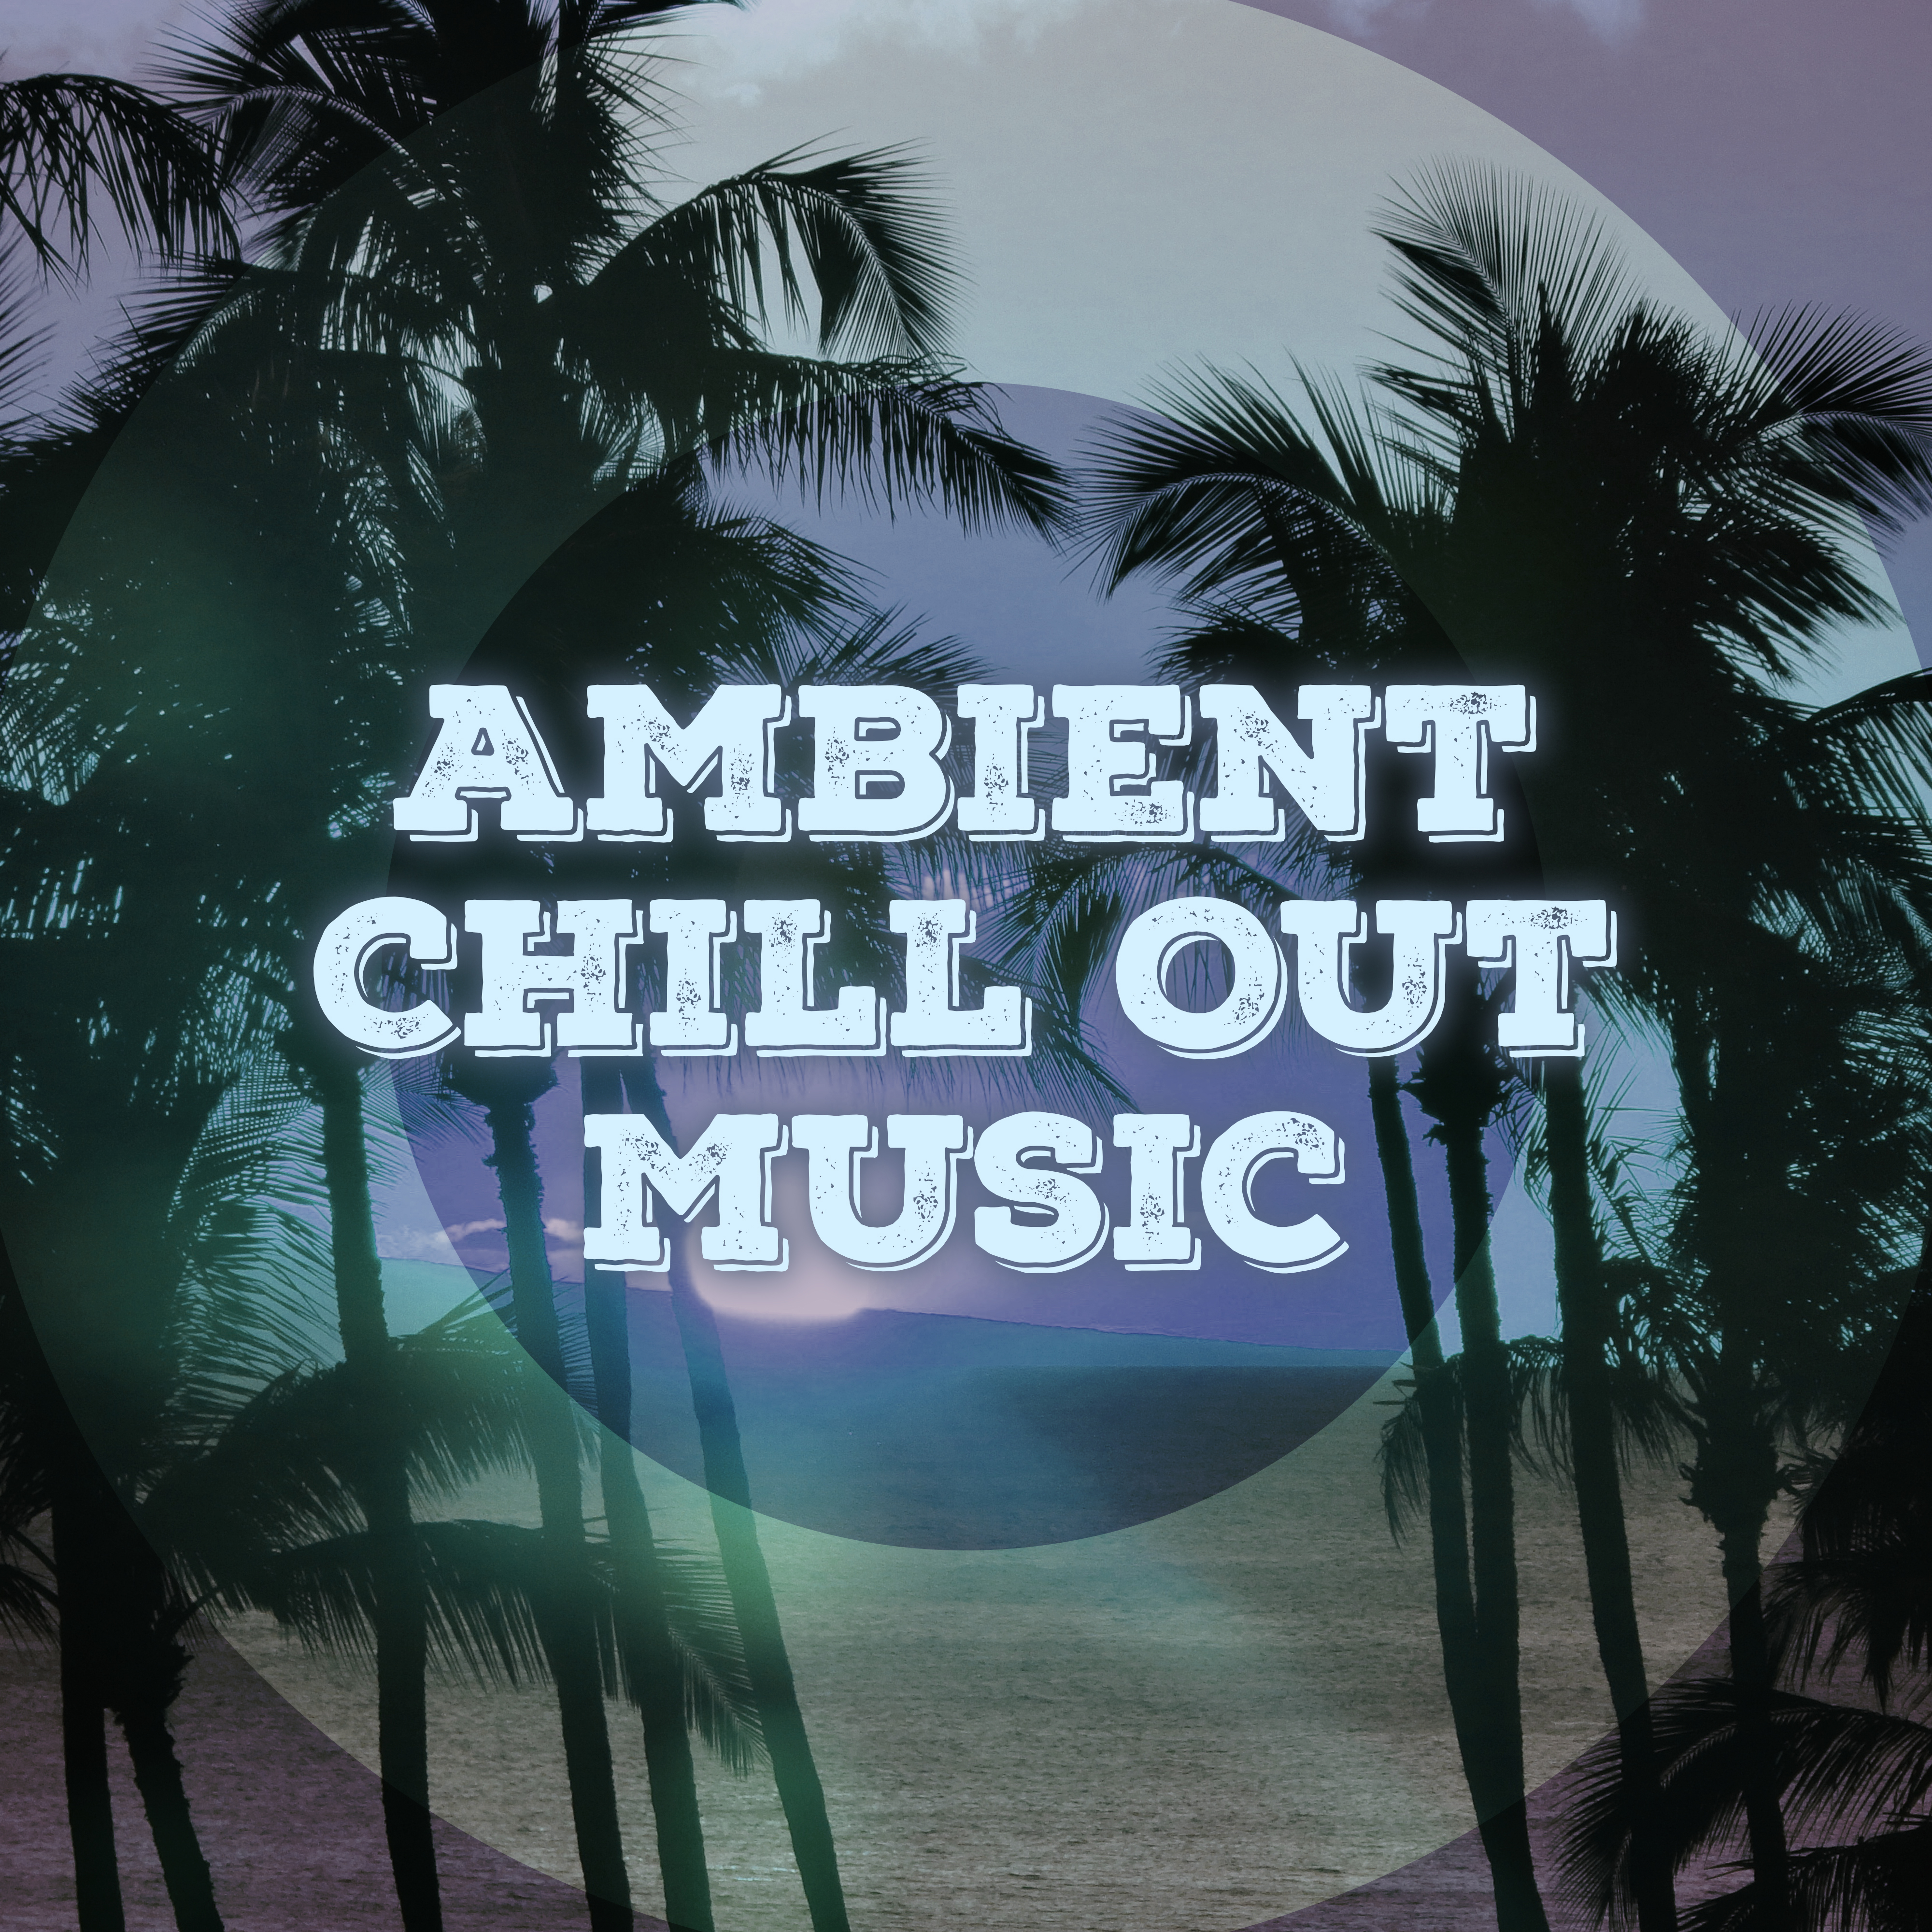 Ambient Chill Out Music  Relaxing Music, Chill Yourself, Summer Relaxation, Beach Lounge, Rest a Bit